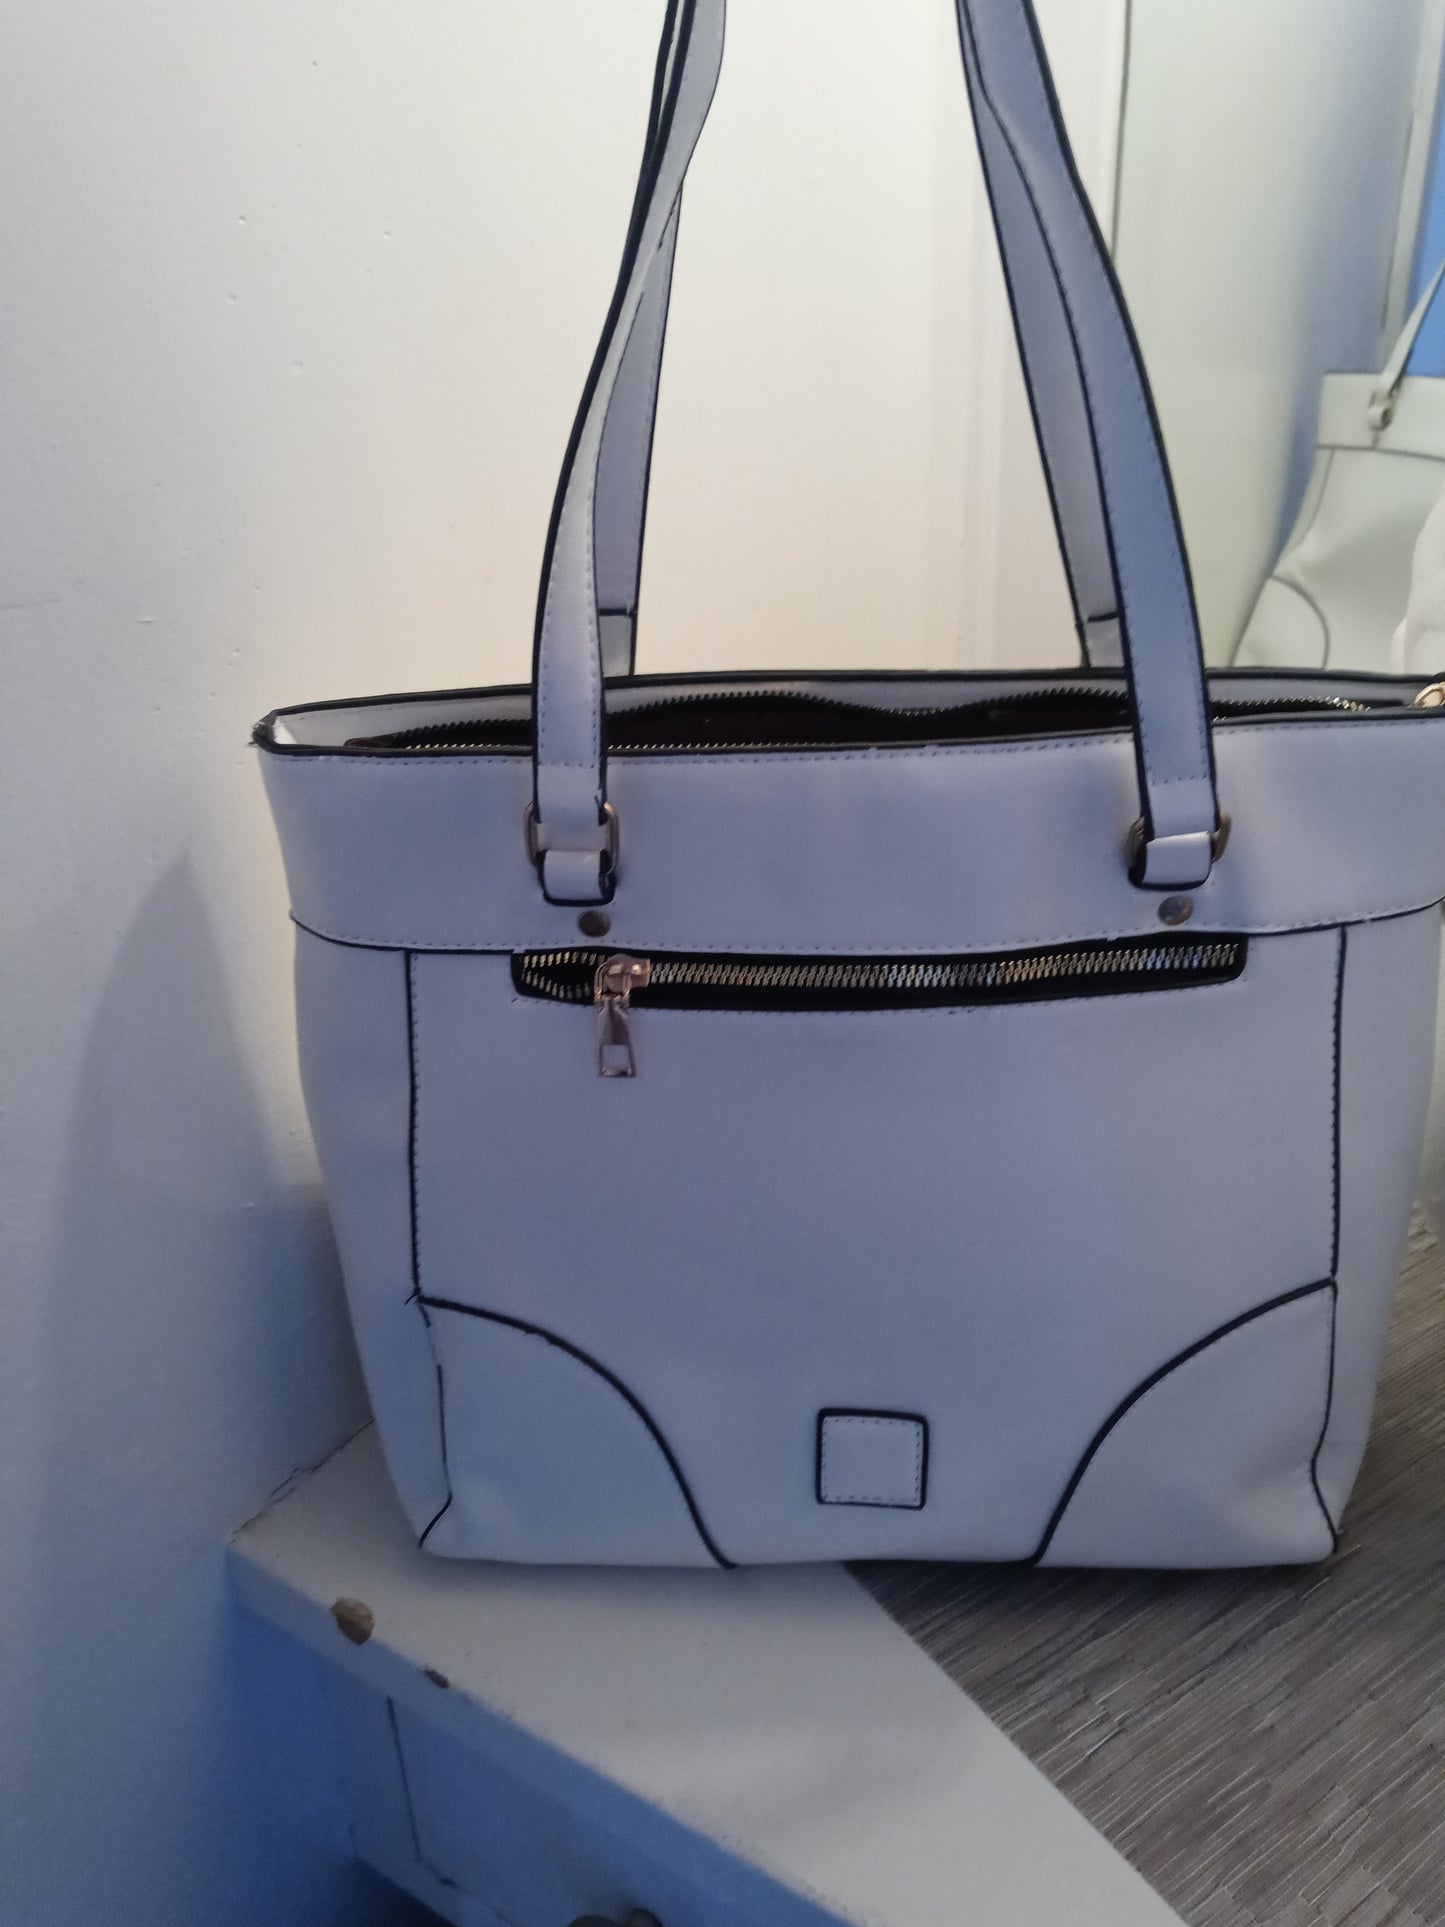 Women's Purse With White Handles White bag